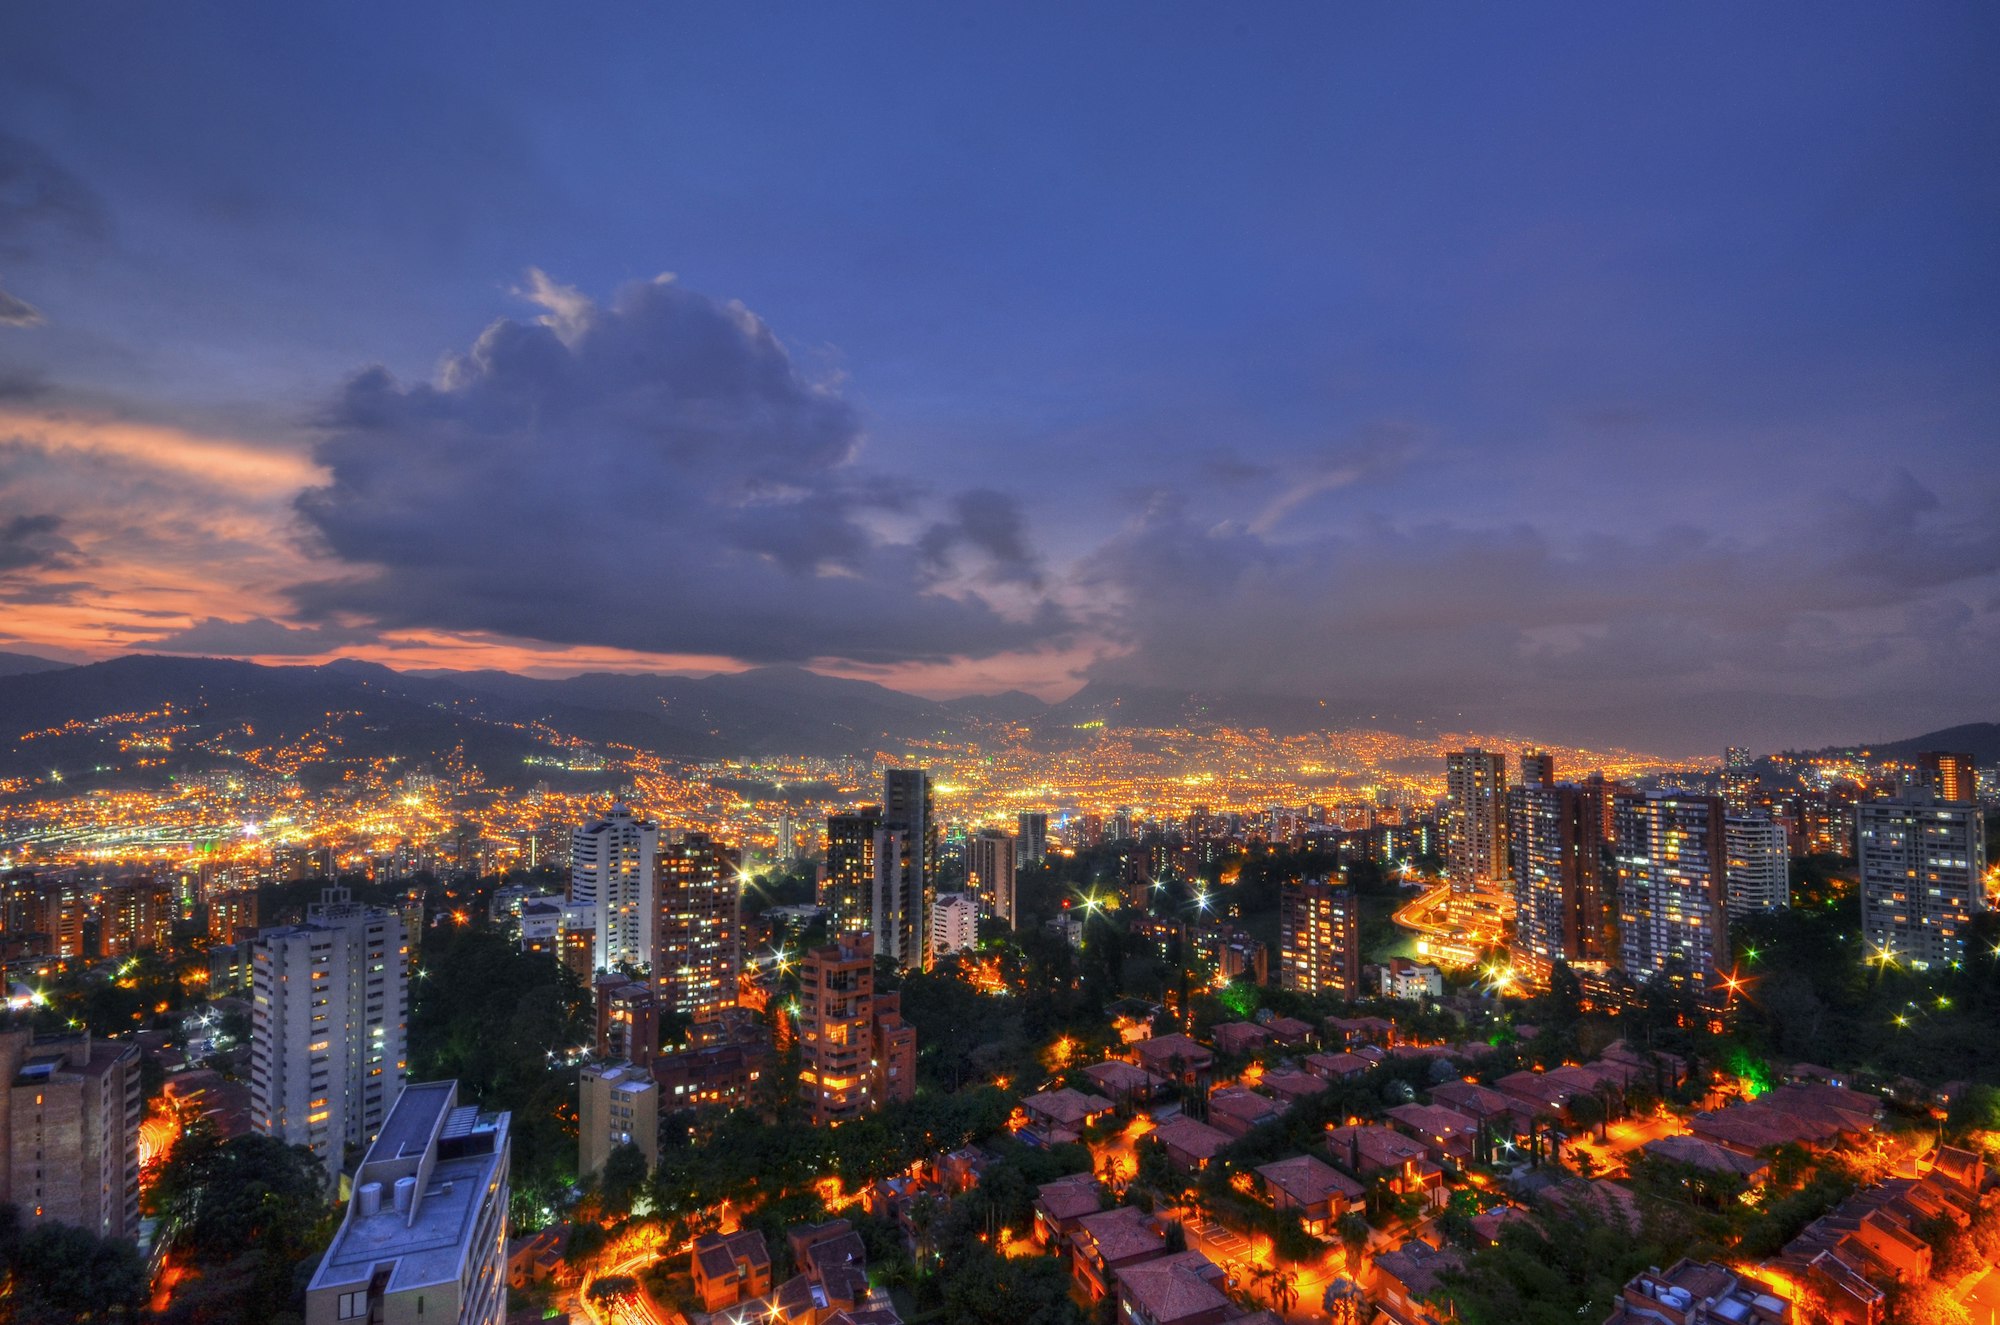 It’s hard to find pictures of Medellin Colombia that aren’t breathtaking. This was taken from the rooftop of a luxury penthouse in the Poblado neighbourhood in Medellin.